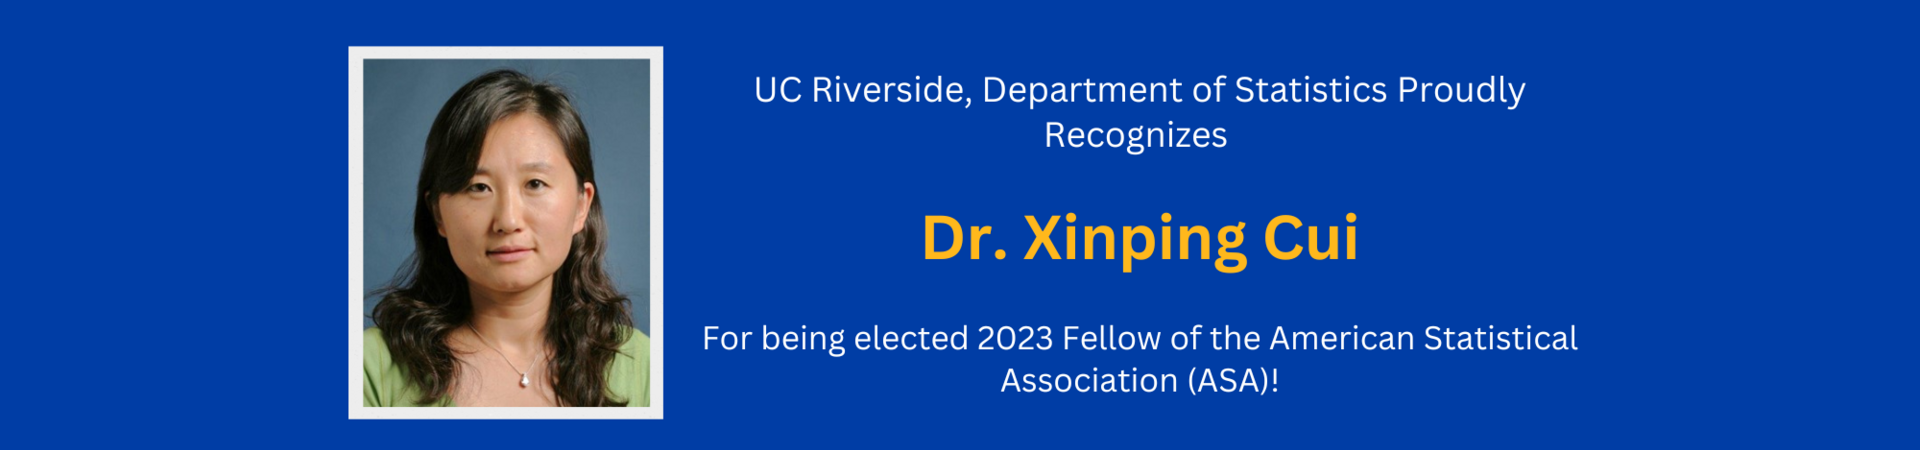 Dr. Xinping Cui elected 2023 fellow of the ASA